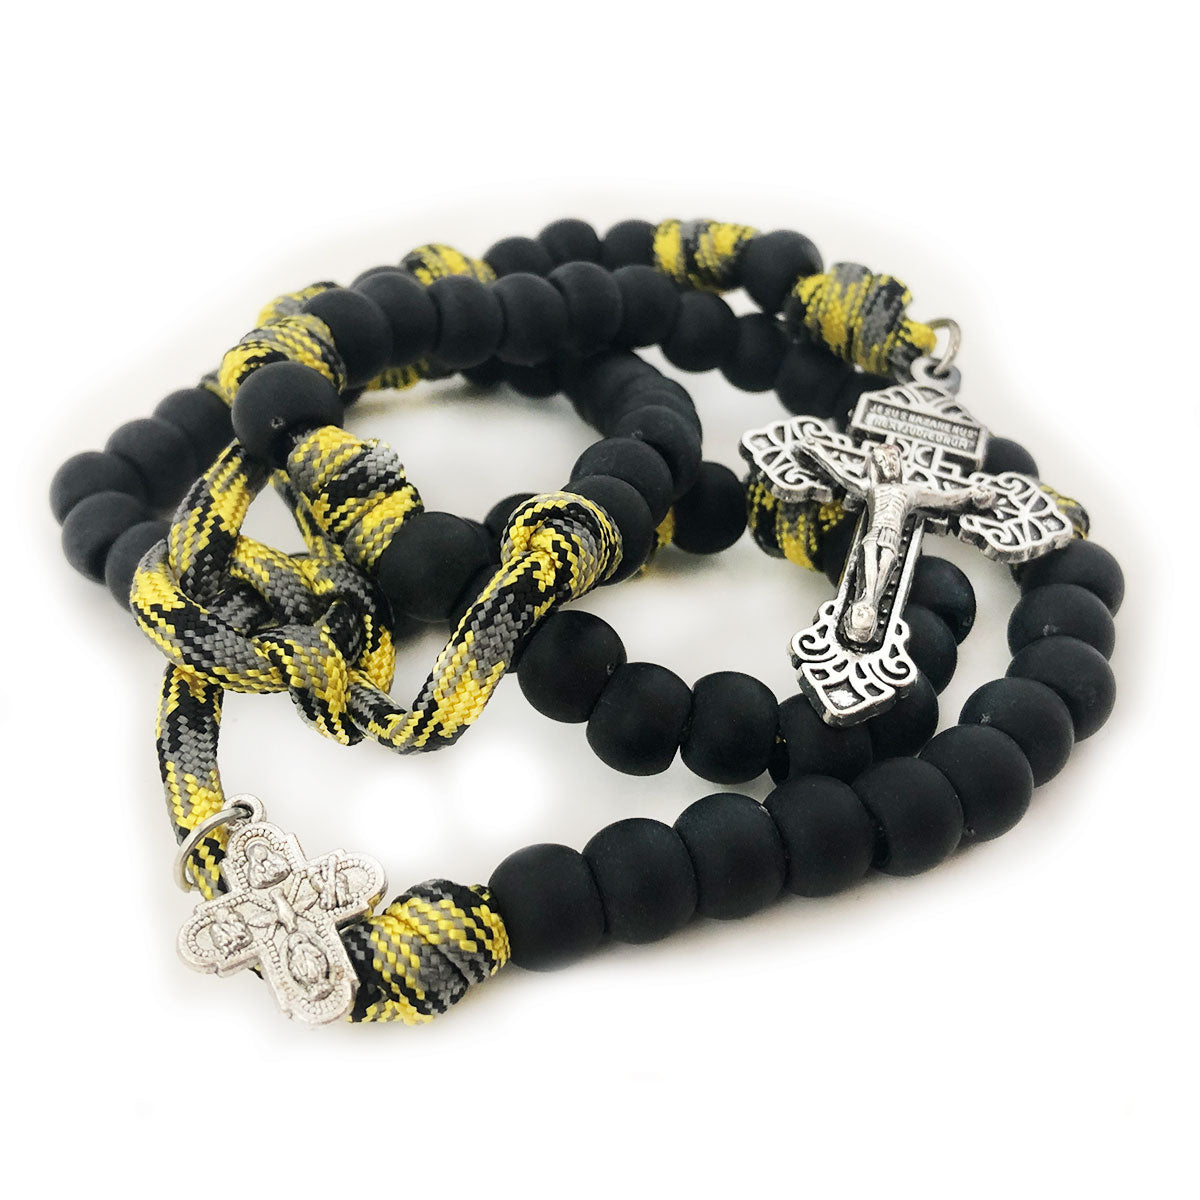 Four Way Medal Black and Yellow Paracord Rosary and Bracelet Set